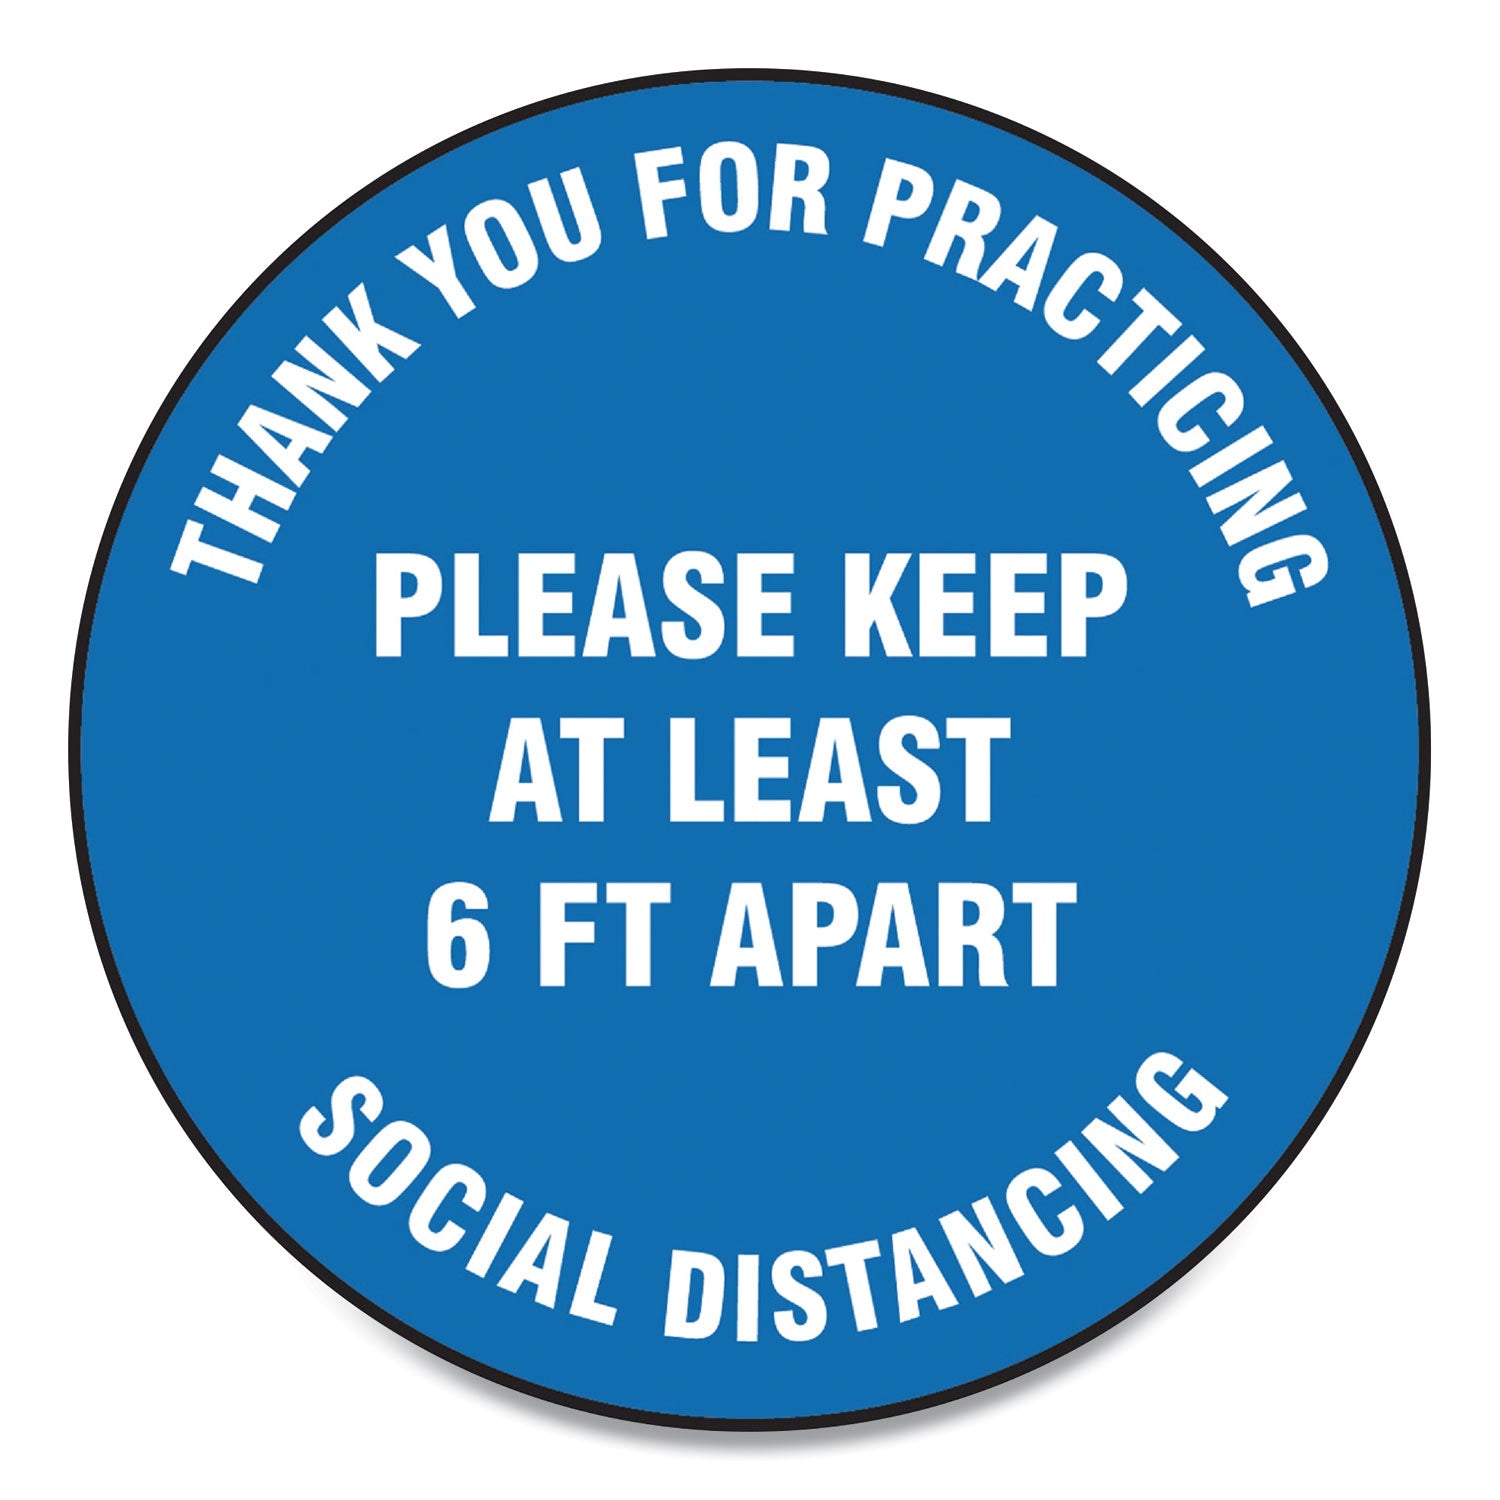 slip-gard-floor-signs-17-circle-thank-you-for-practicing-social-distancing-please-keep-at-least-6-ft-apart-blue-25-pk_gn1mfs421esp - 1